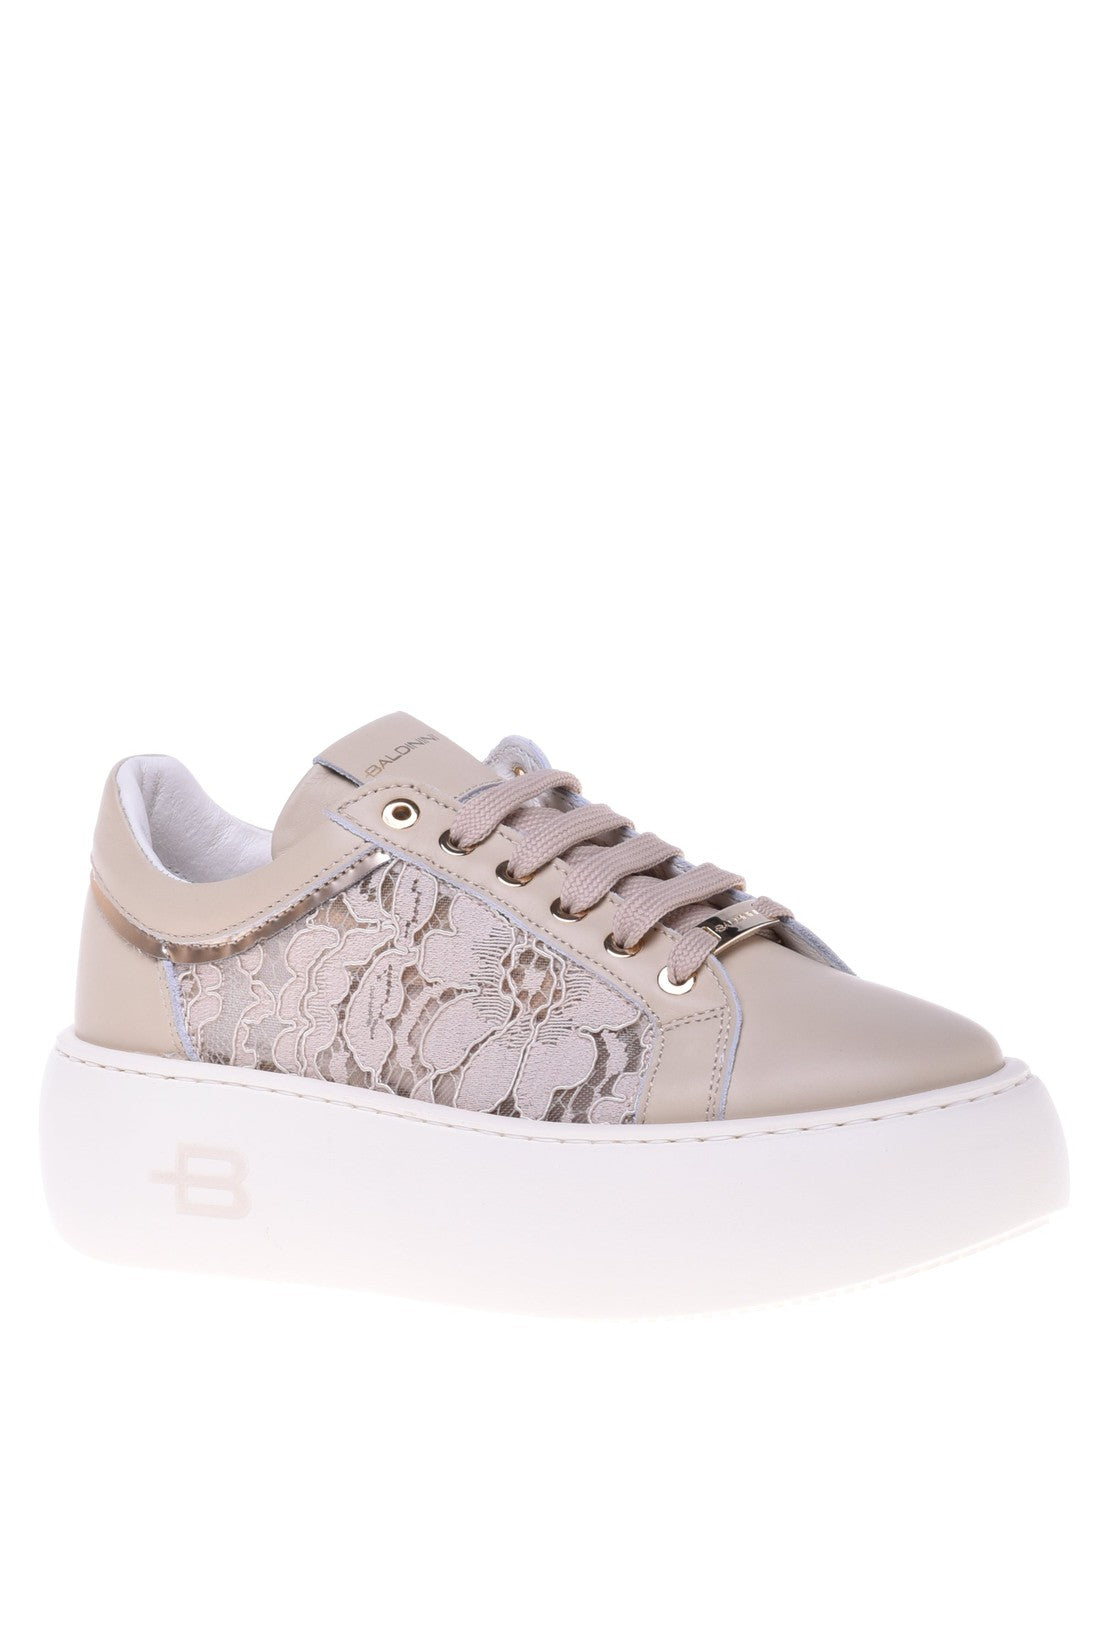 BALDININI-OUTLET-SALE-Sneaker-in-beige-nappa-leather-and-lace-Sneaker-35-ARCHIVE-COLLECTION.jpg